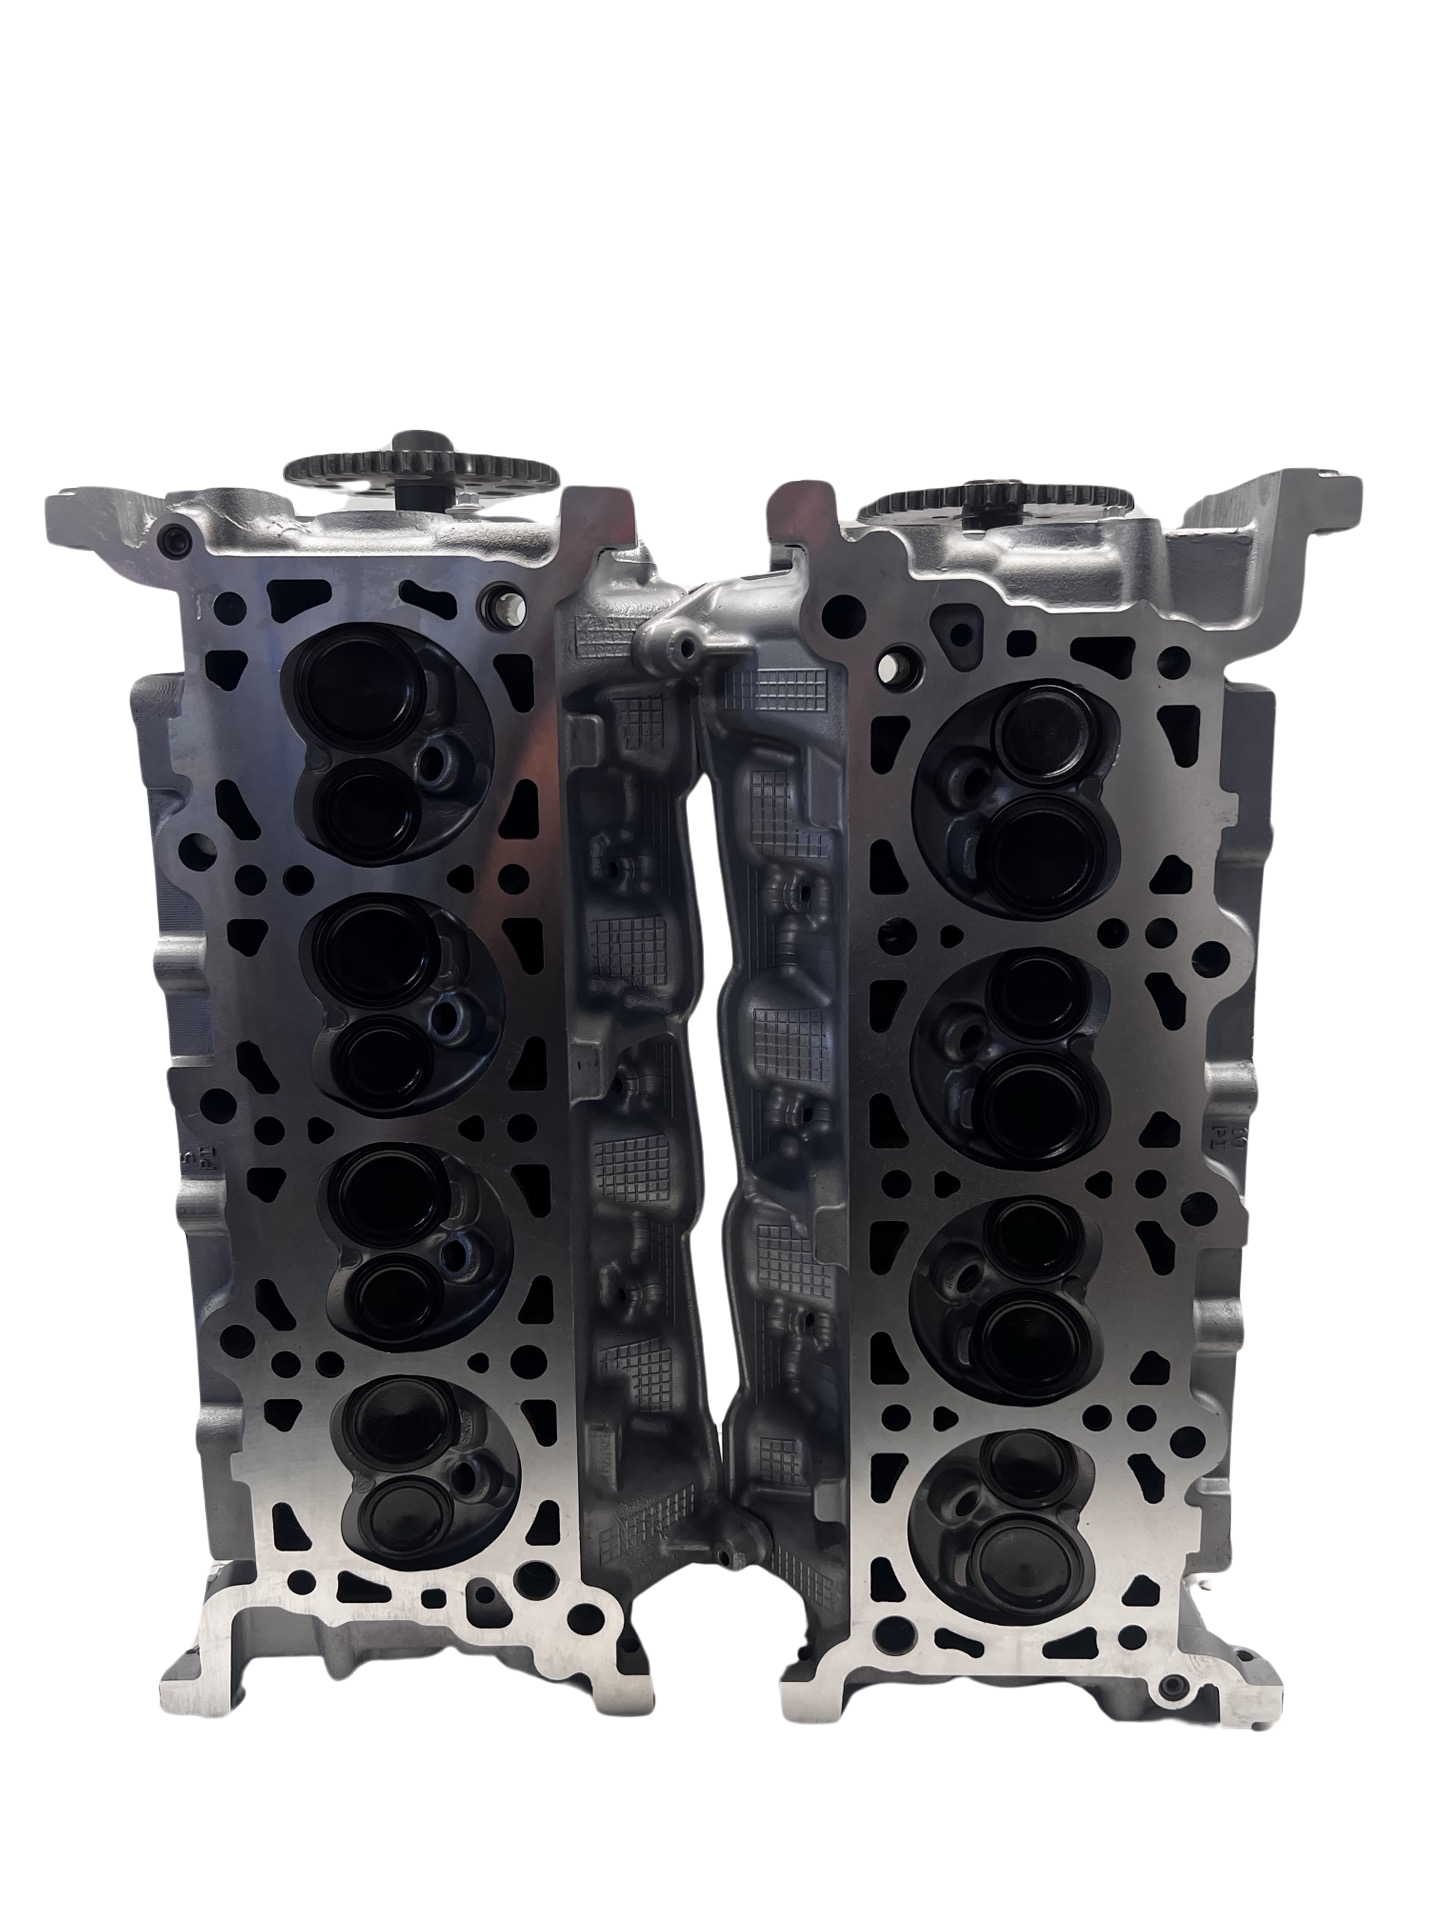 Bottom of cylinder heads for a Ford 5.4L Casting #XL3E (SOLD IN PAIR)